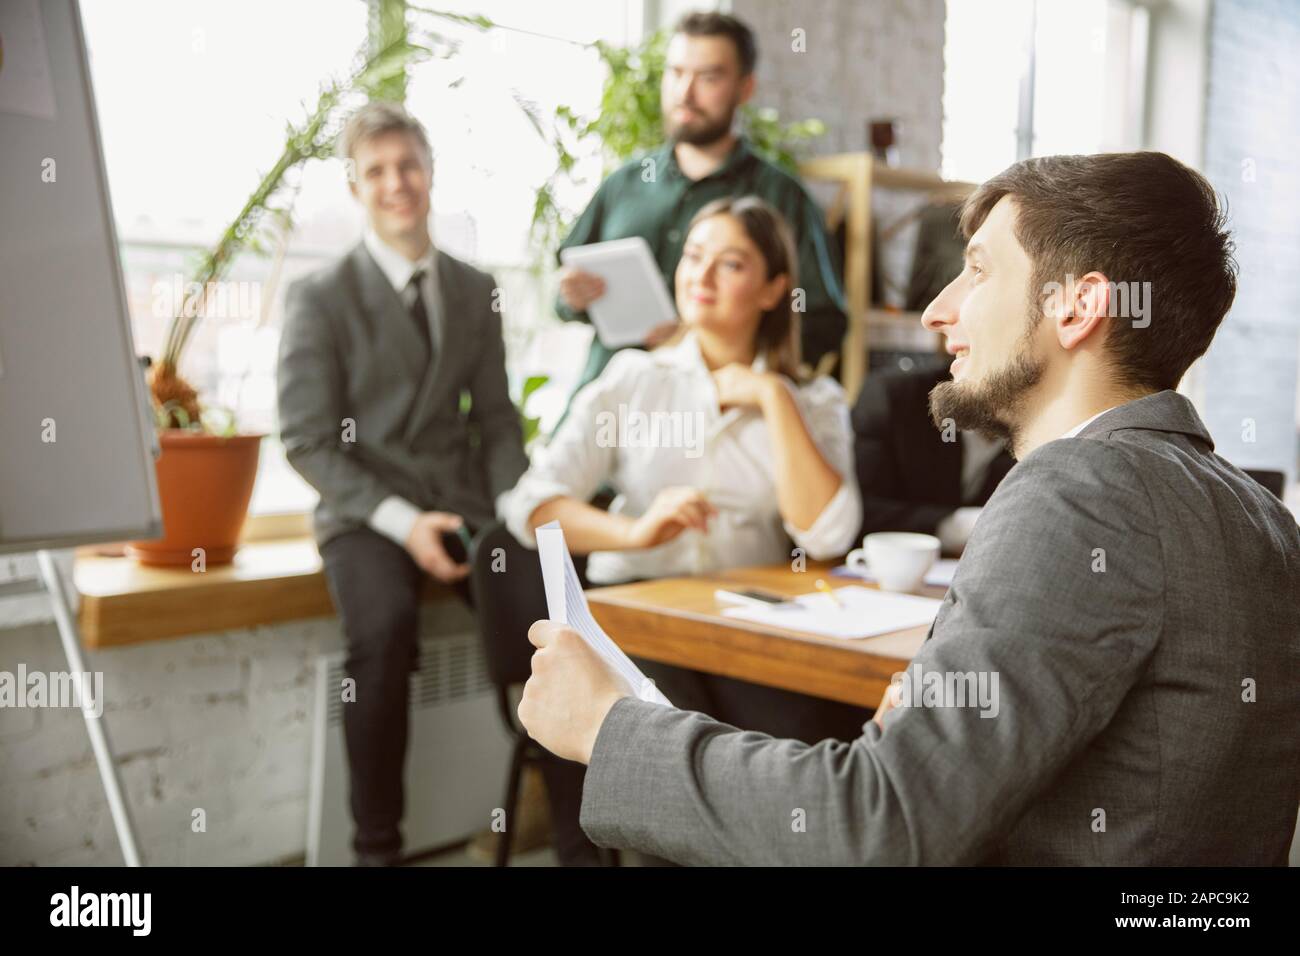 For ideas. Group of young business professionals having a meeting. Diverse group of coworkers discuss new decisions, plans, results, strategy. Creativity, workplace, business, finance, teamwork. Stock Photo